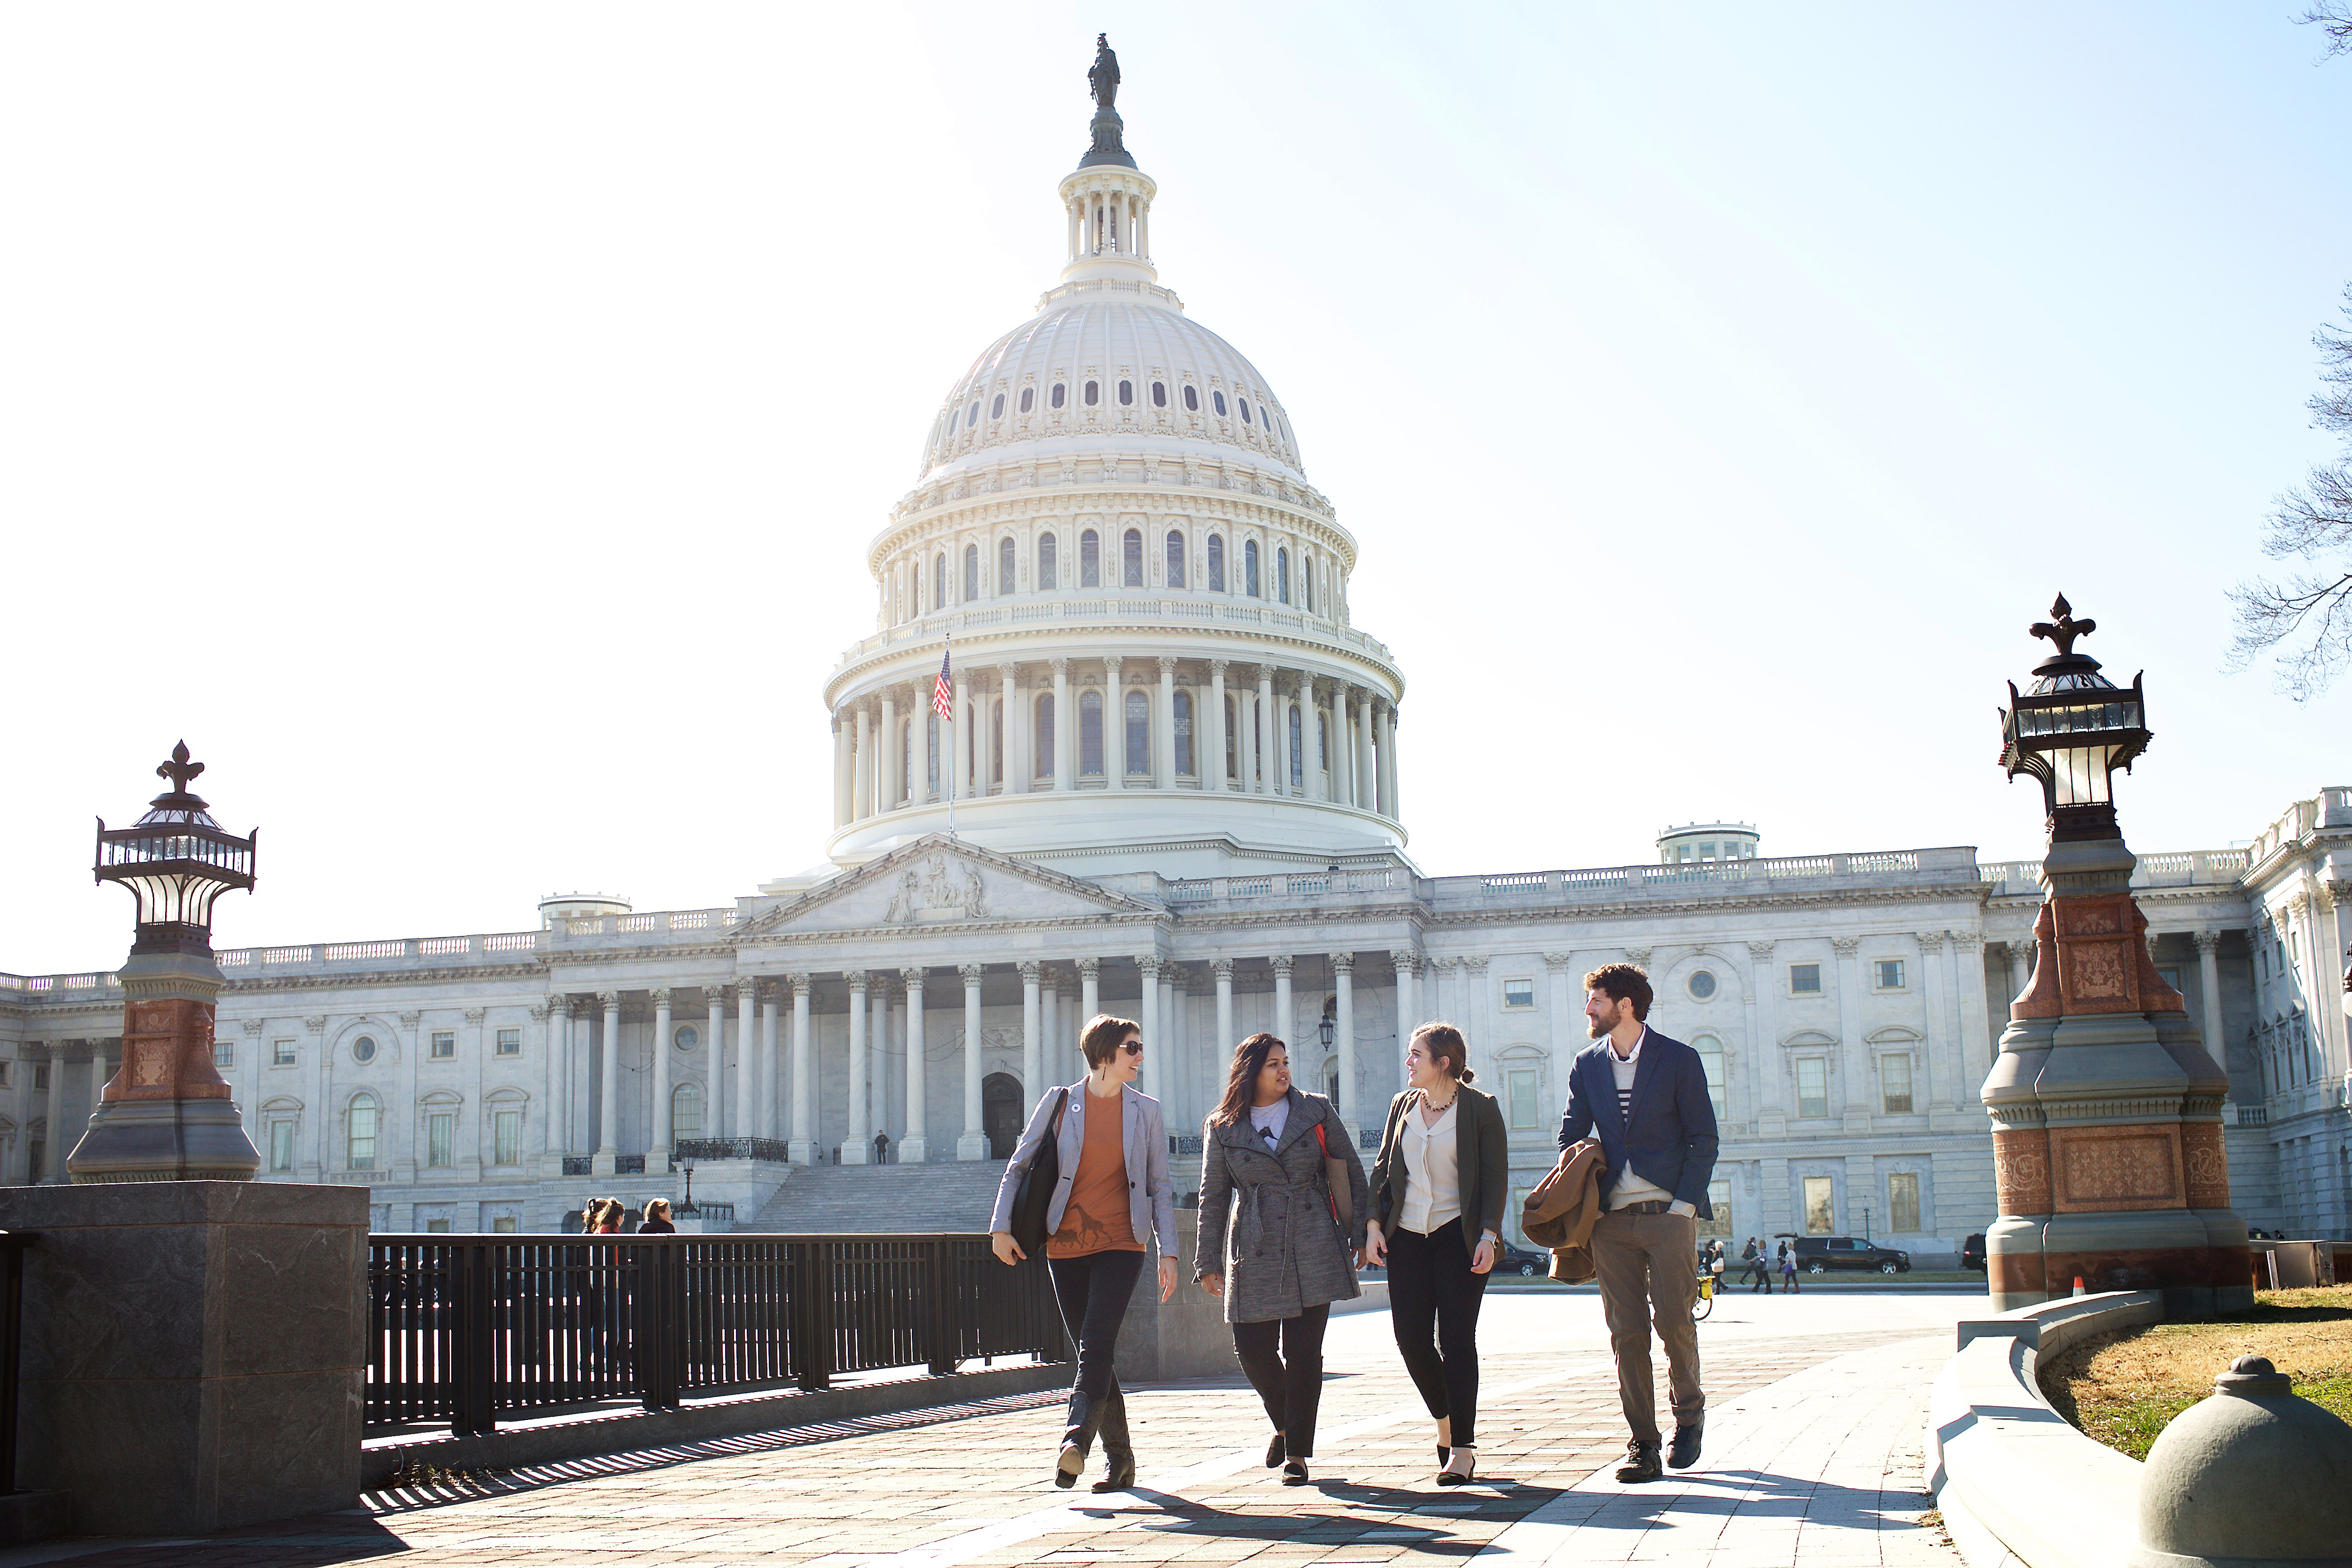 A group of people walking outside with the United States Capitol building behind them